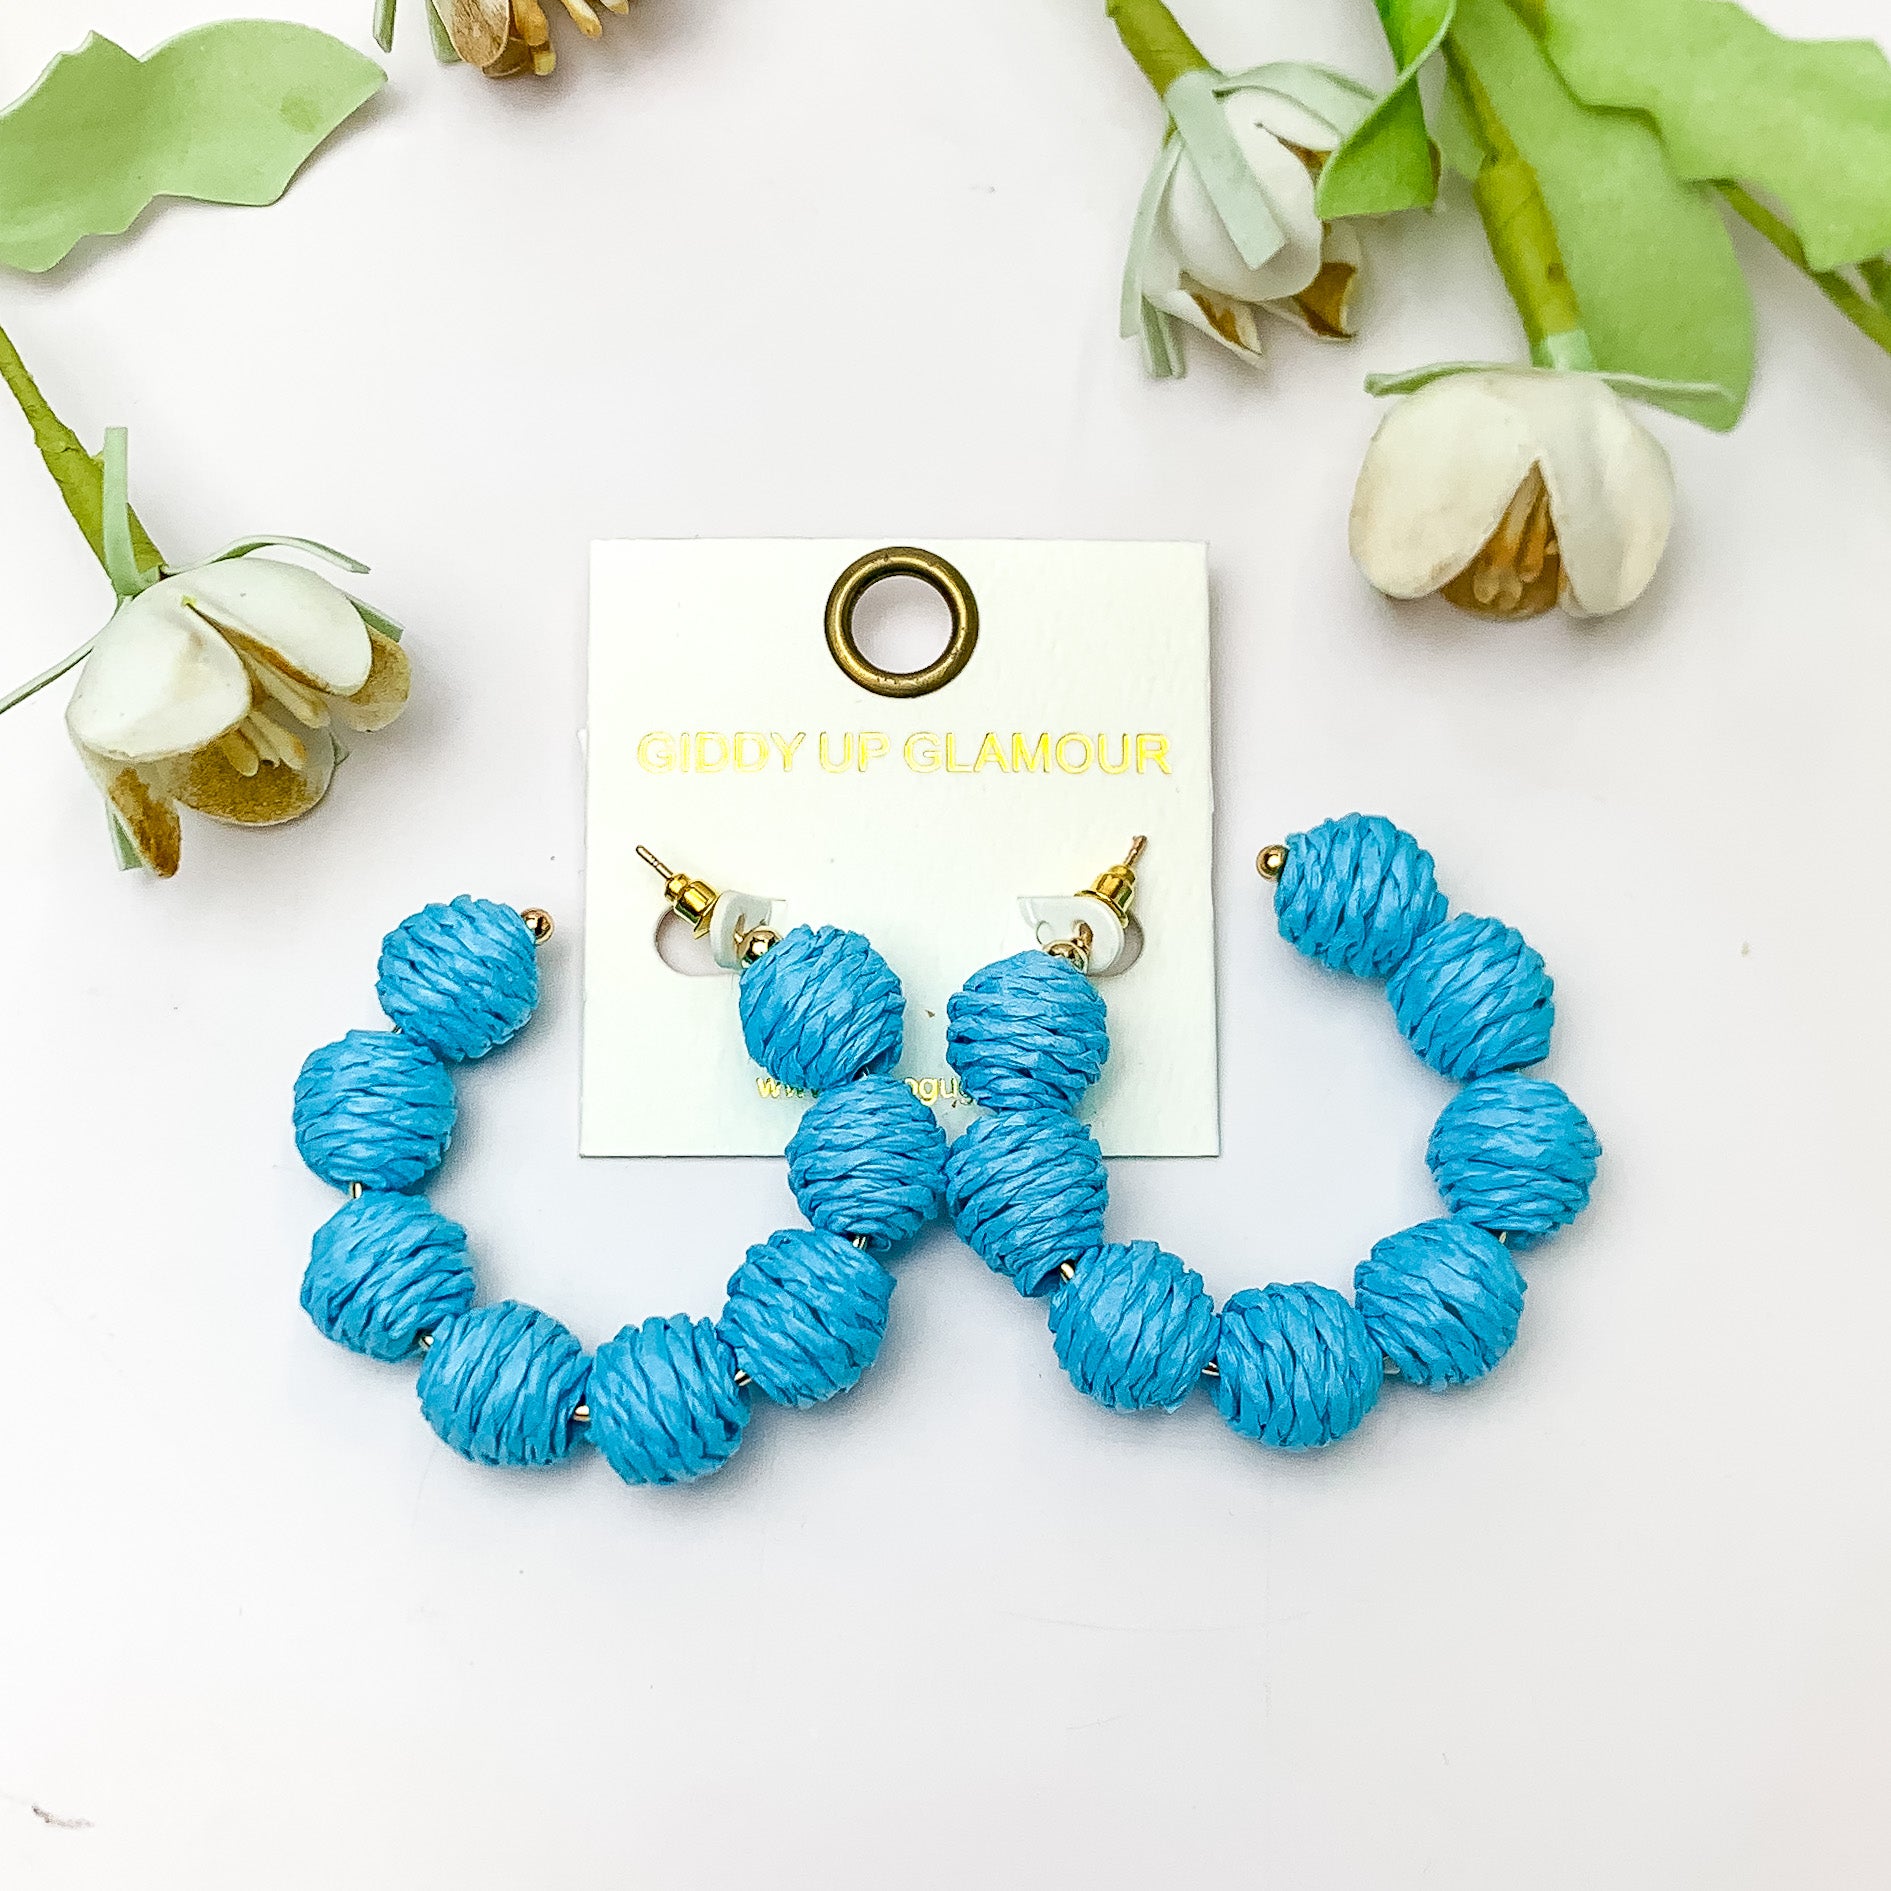 Sorbet Summer Raffia Ball Hoop Earrings in Blue. Pictured on a white background with flowers above the earrings.